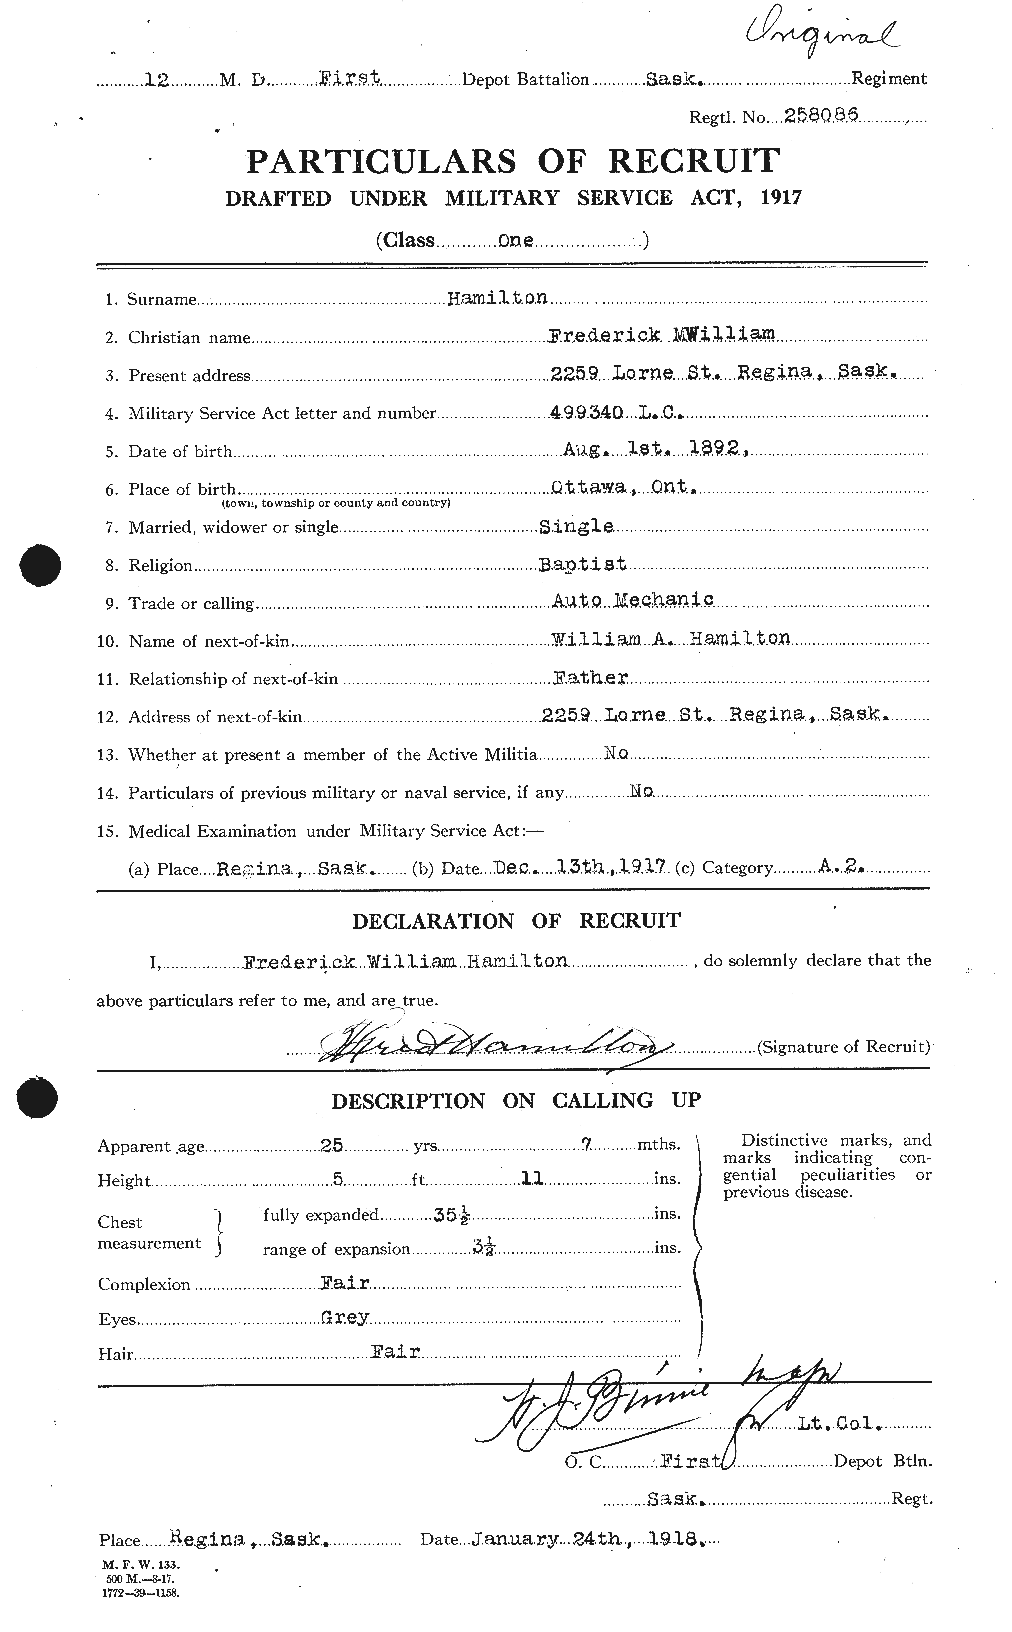 Personnel Records of the First World War - CEF 372416a